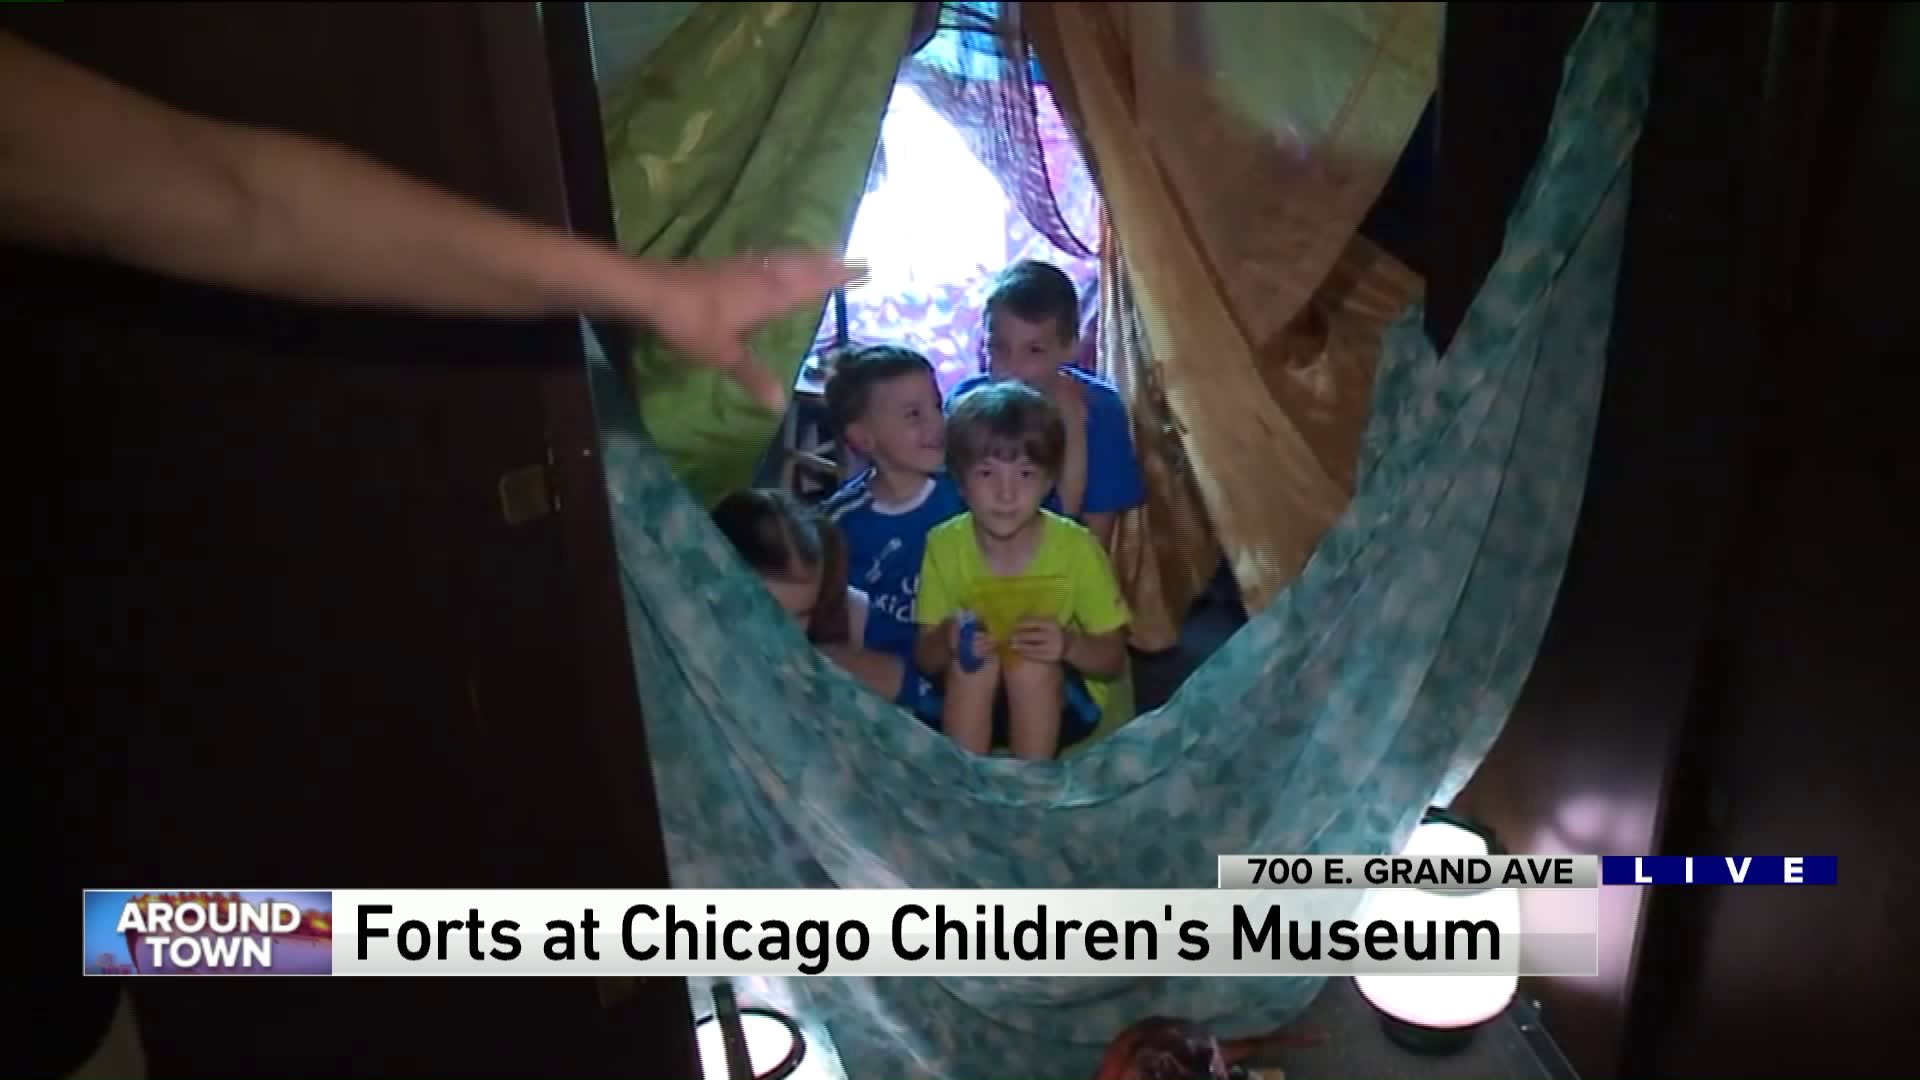 Around Town checks out Forts at Chicago Children’s Museum